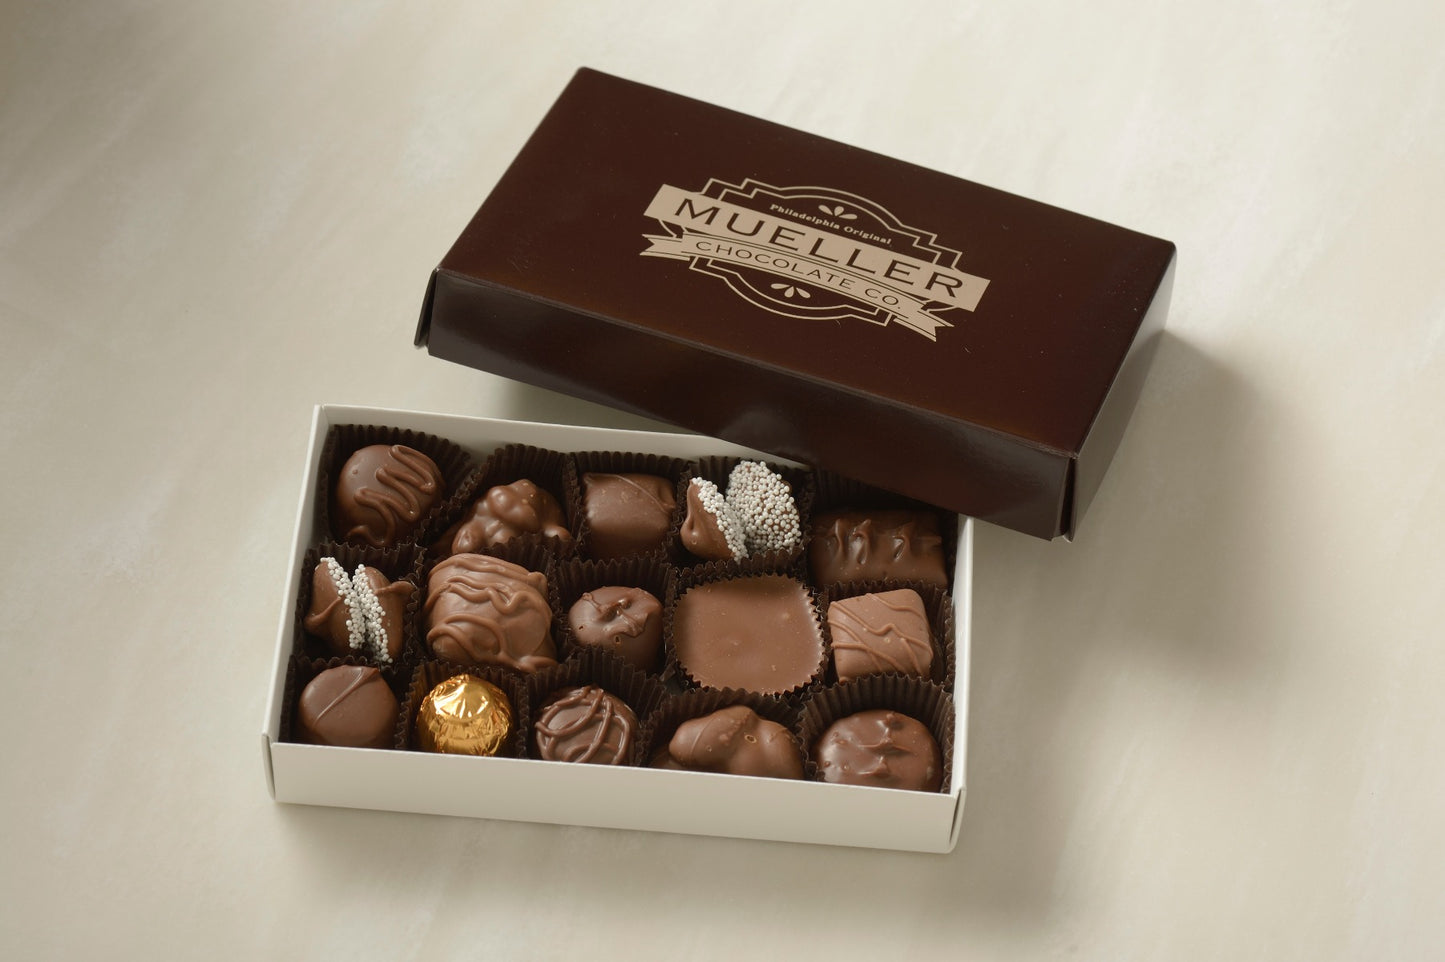 Best Chocolate Assortment - A Box of Assorted Milk Chocolates for Every Sweet Craving